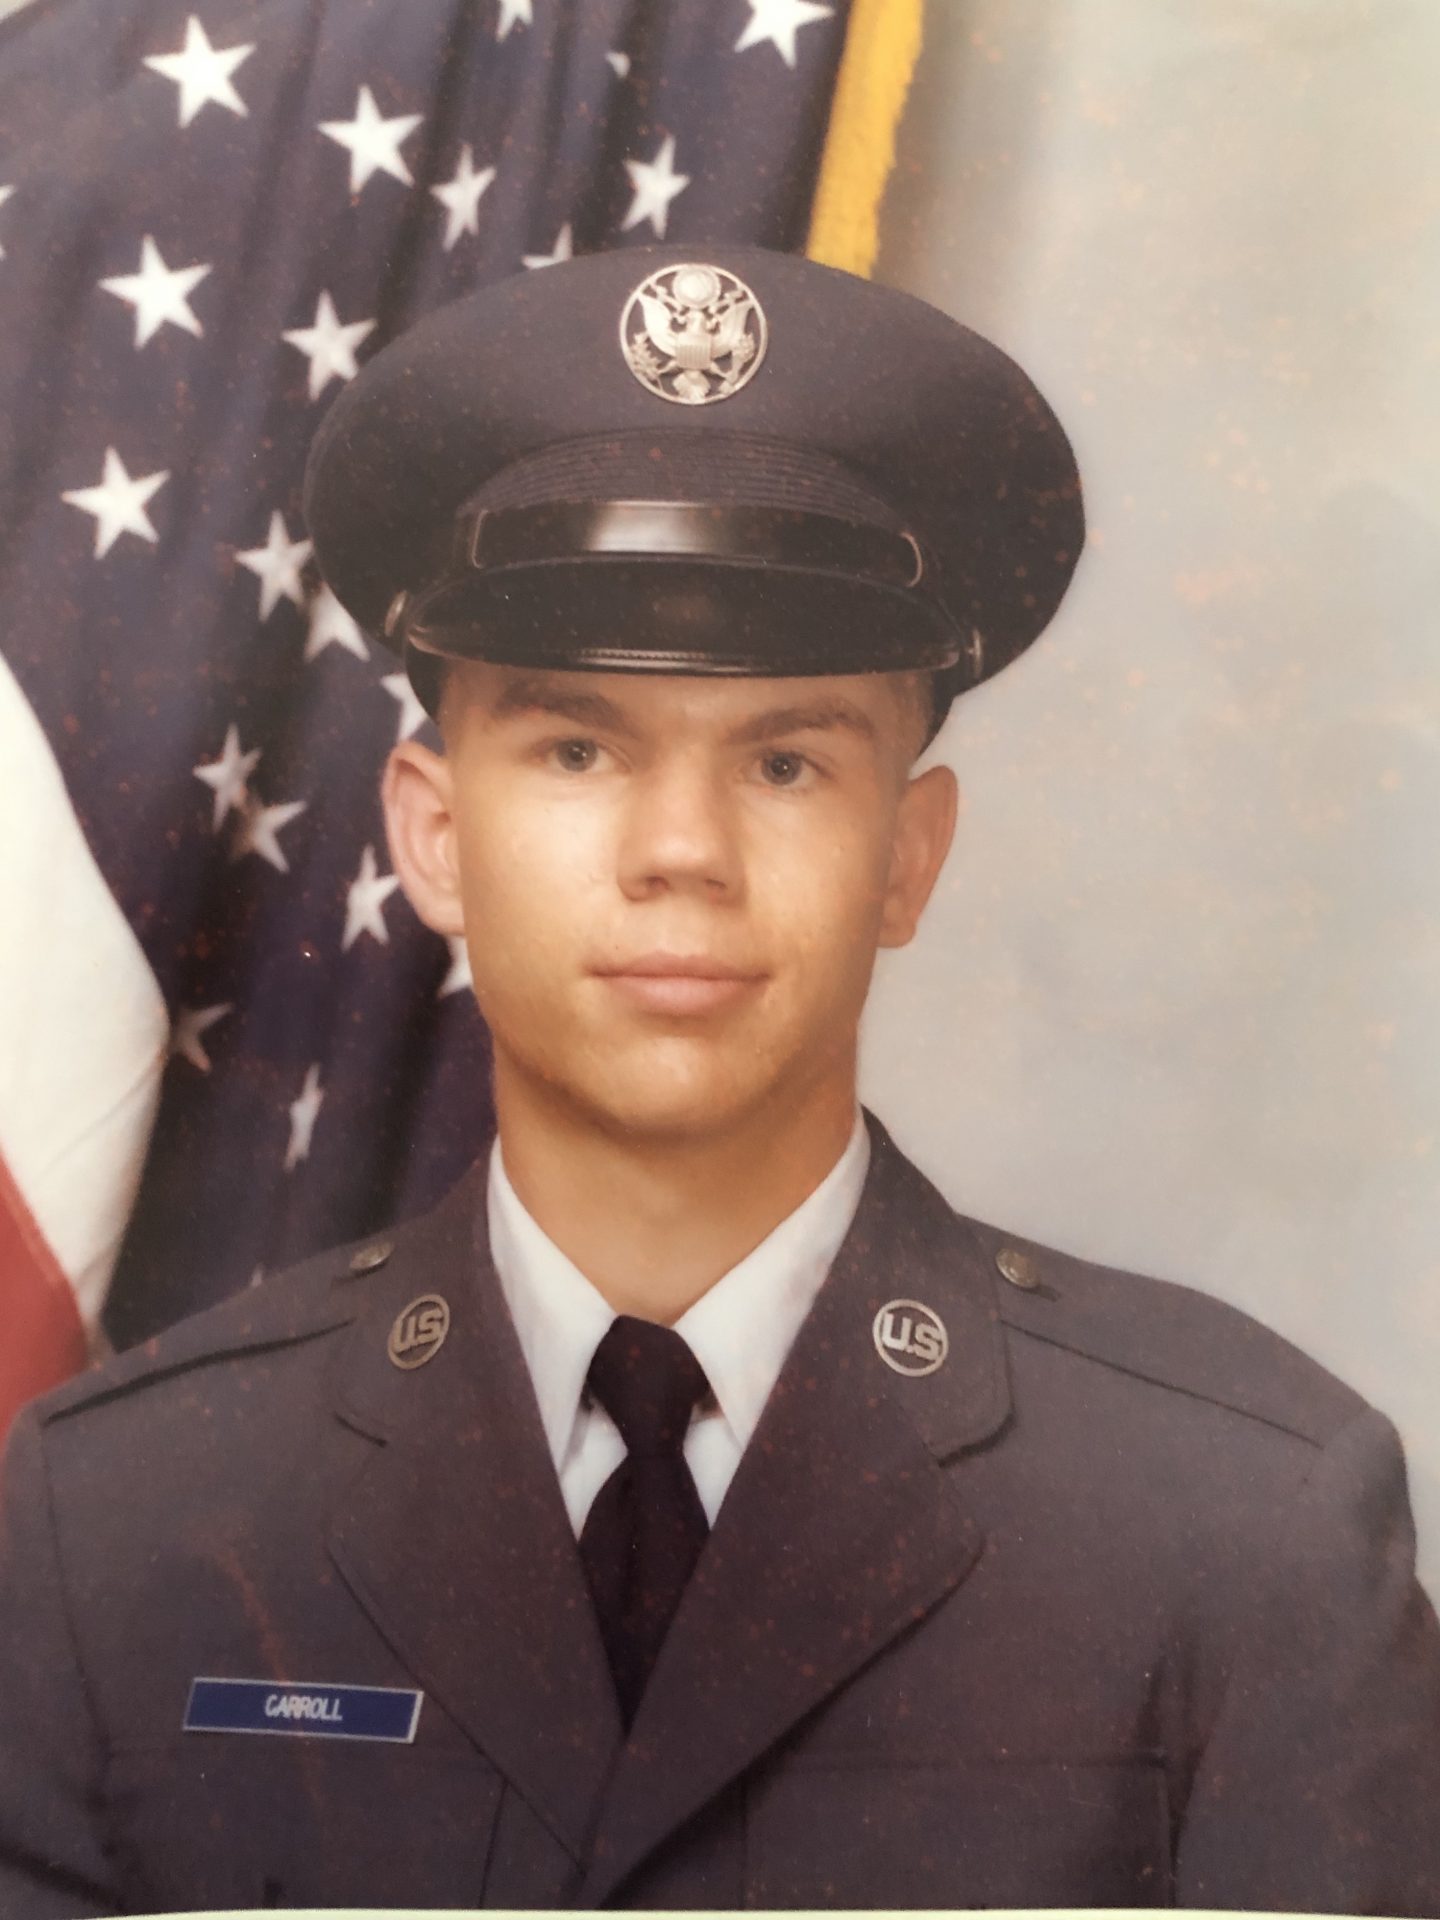 Ben Jr.’s Air Force basic training photo ( at 19 also, 1981) for comparison!